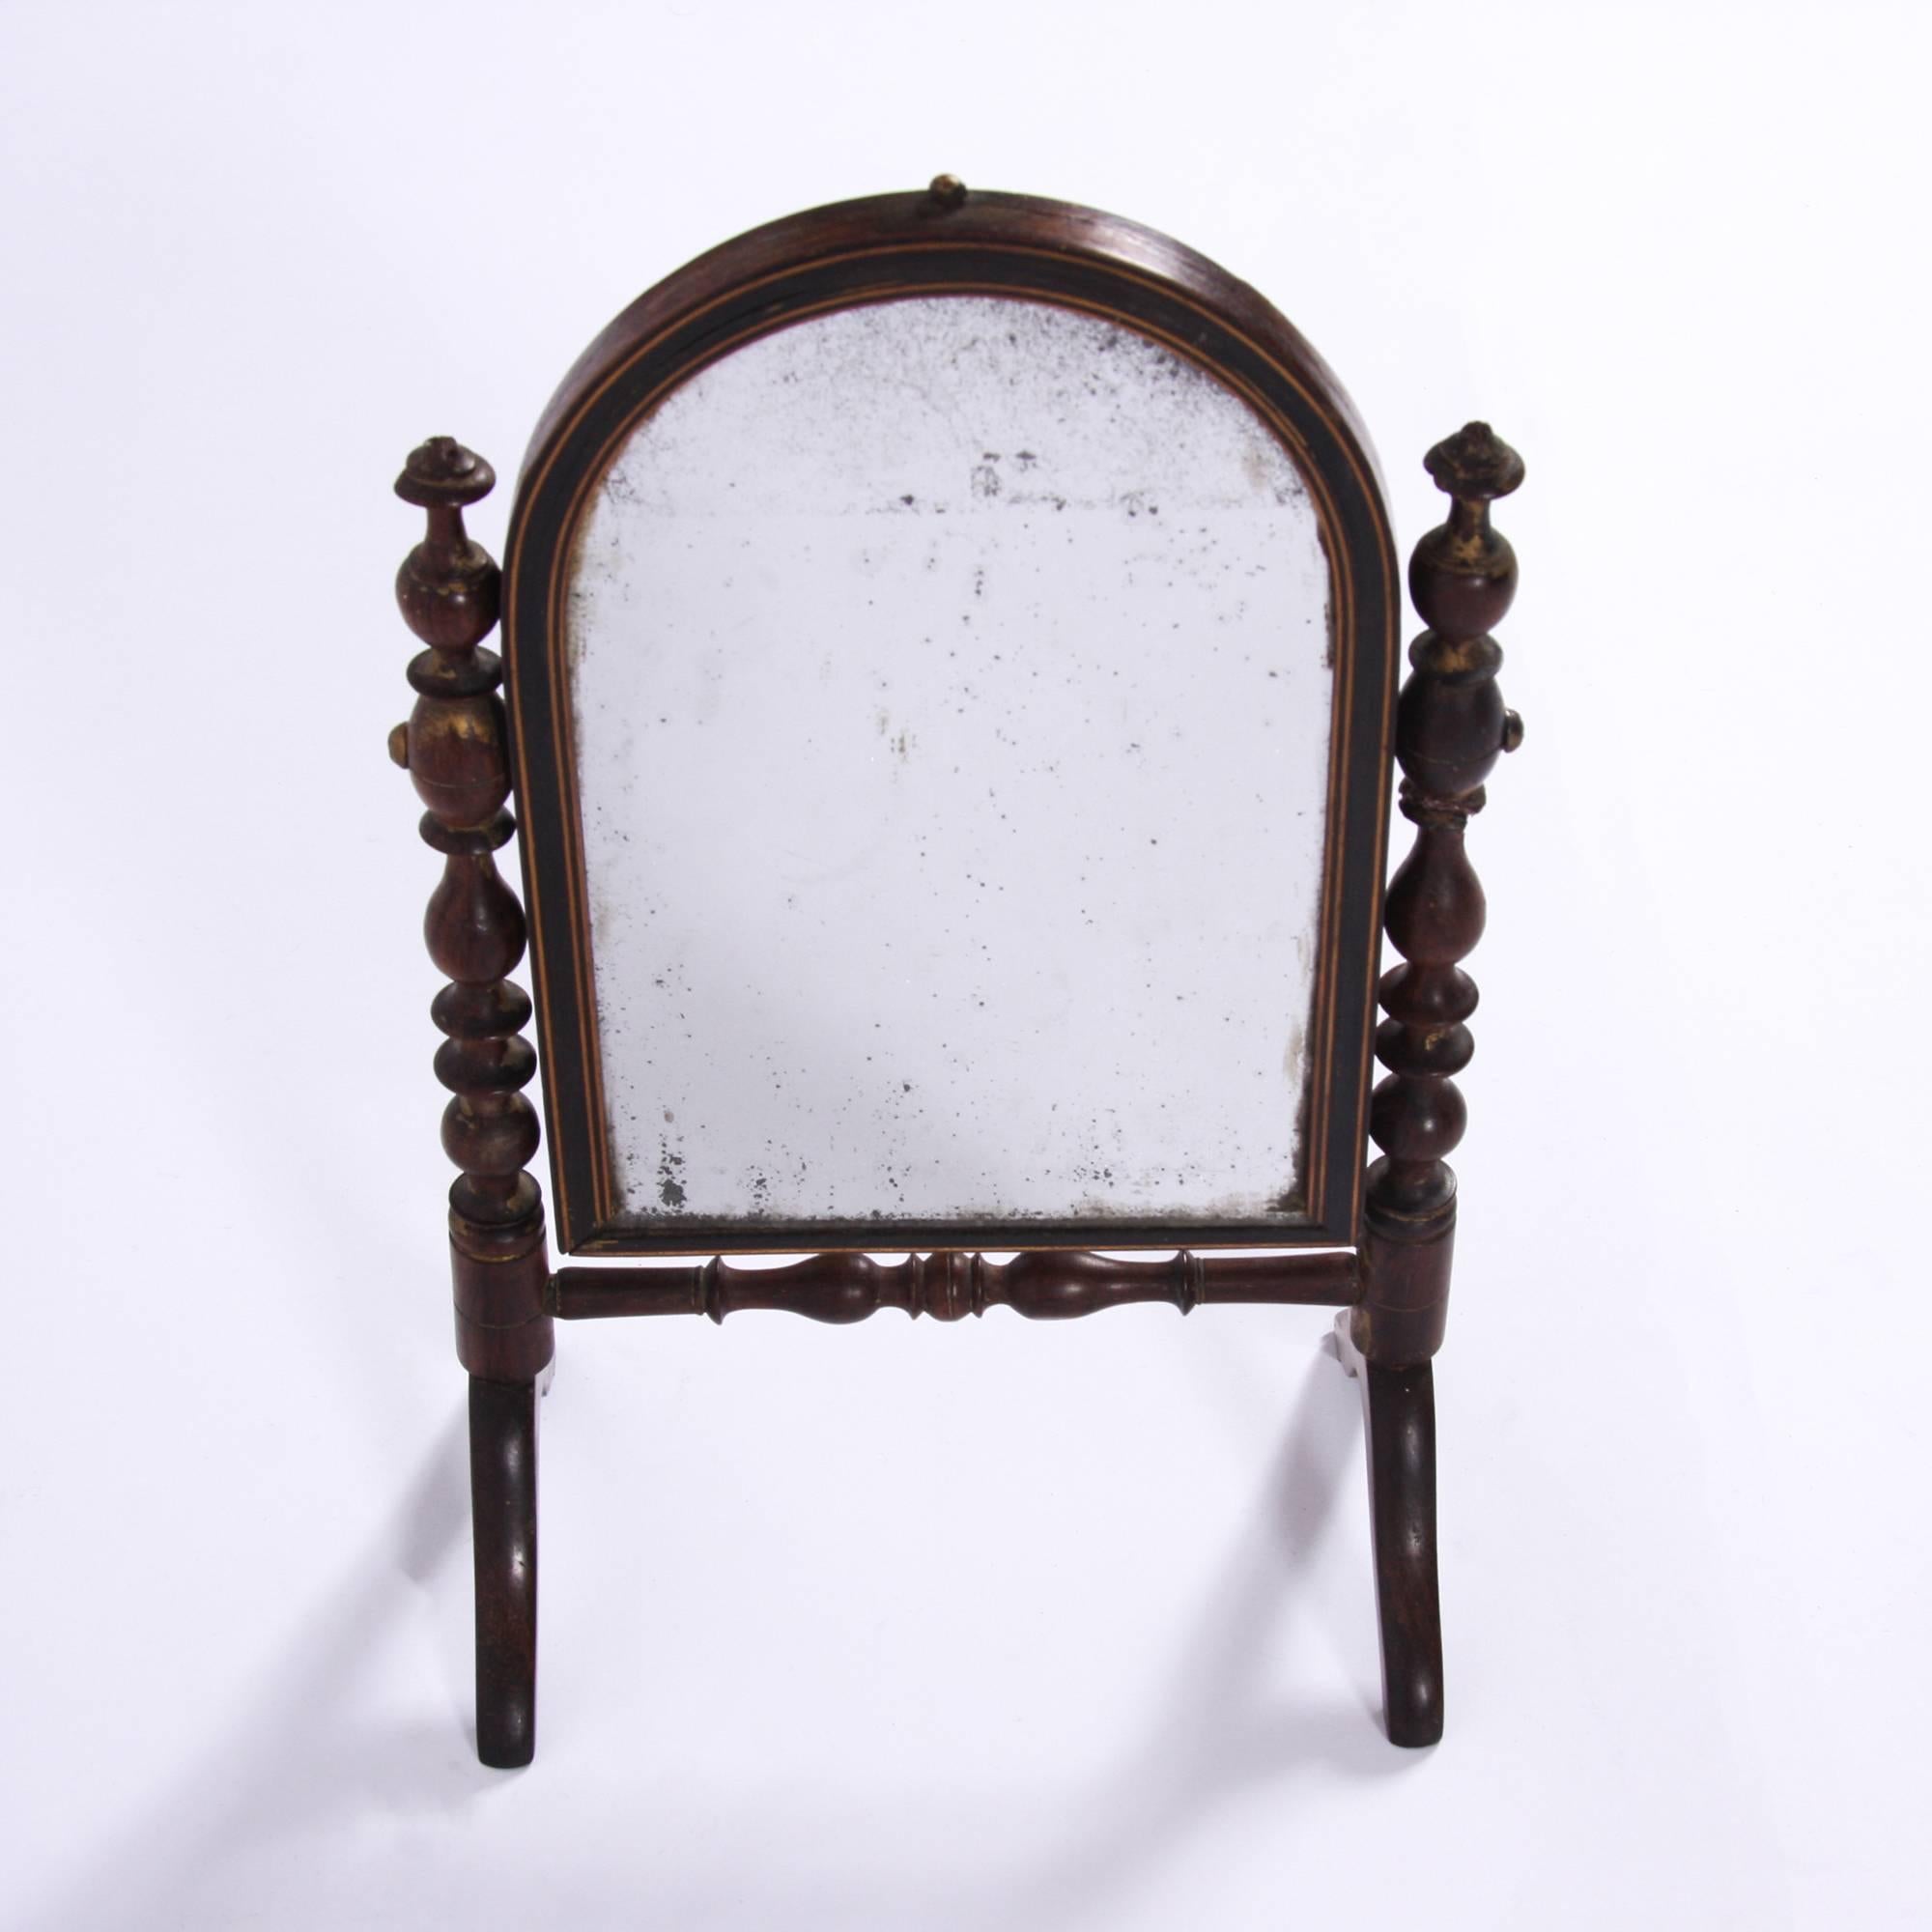 English, 19th century

A miniature Campaign mirror made from turned mahogany with original sparkly mercury glass. The feet fold flat for travel.